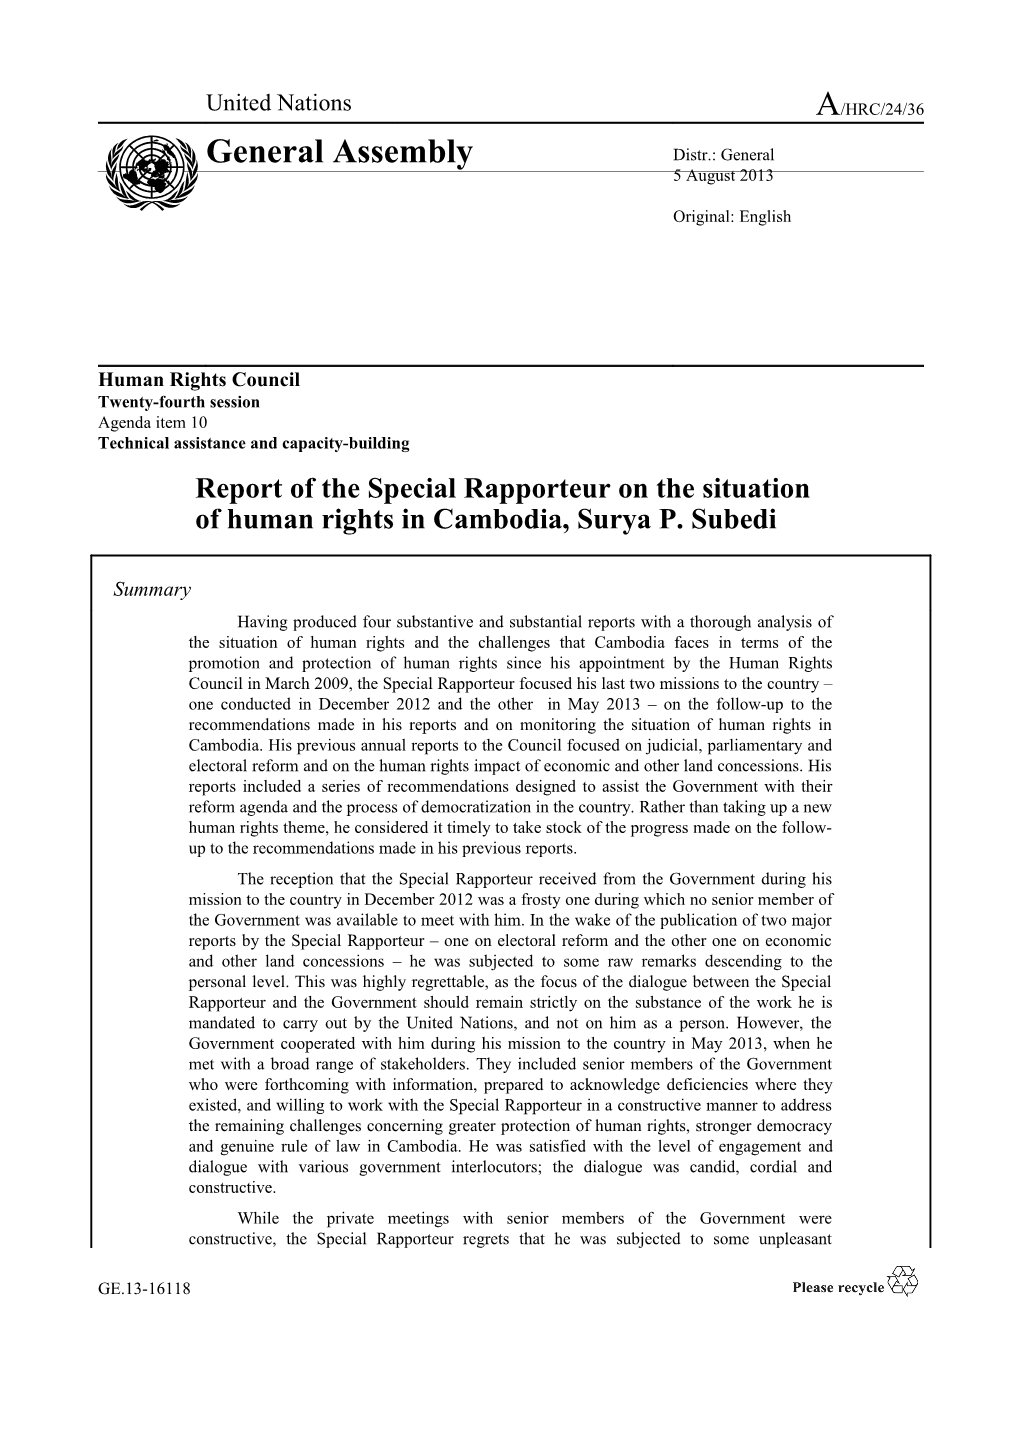 Report of the Special Rapporteur on the Situation of Human Rights in Cambodia in English